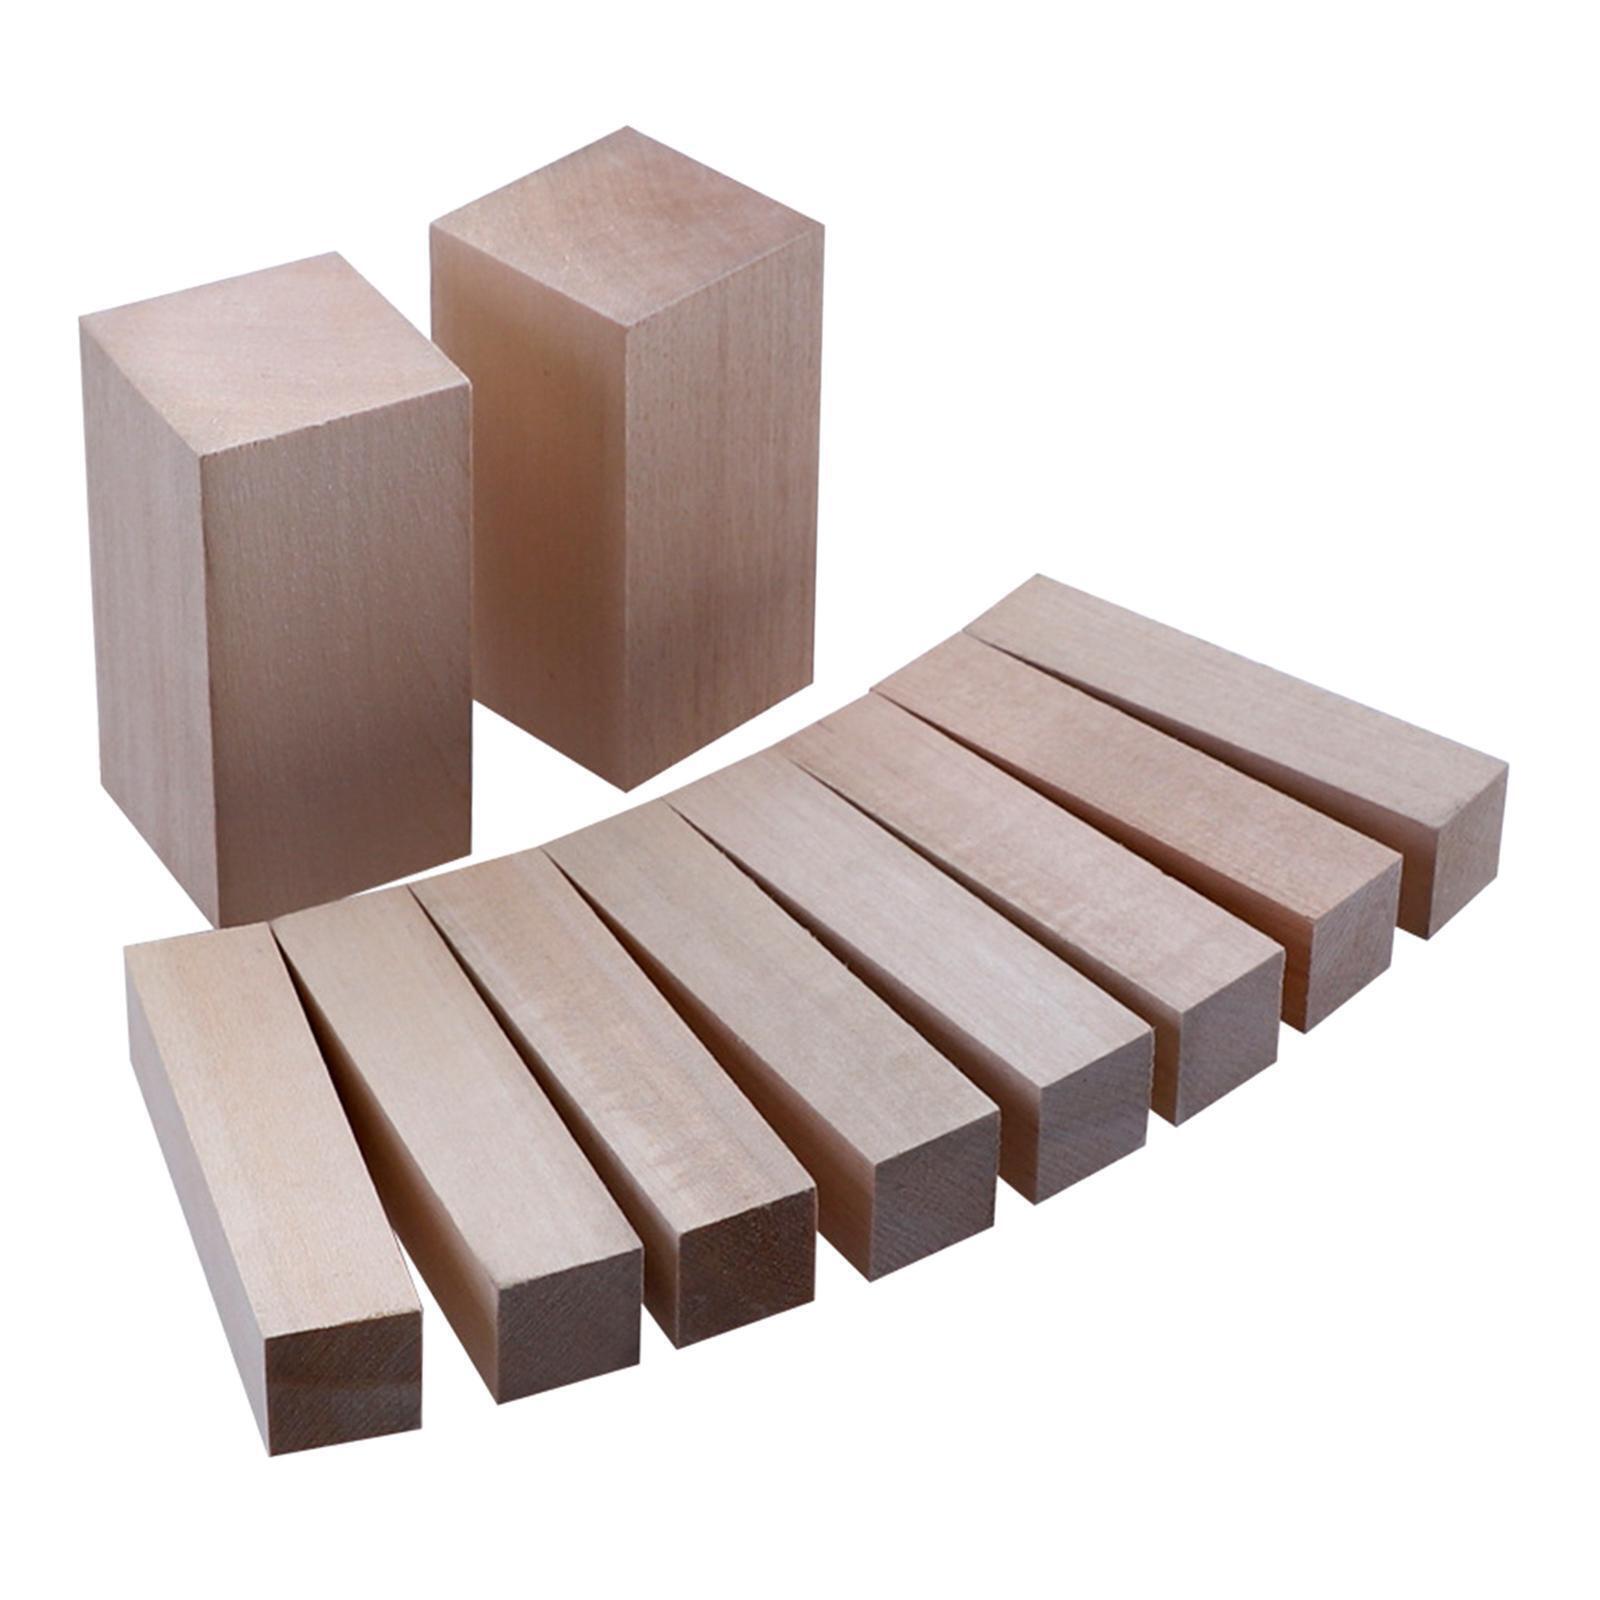 10 Pieces Basswood Carving Blocks Unfinished Wood Blocks Wood Hand Carving